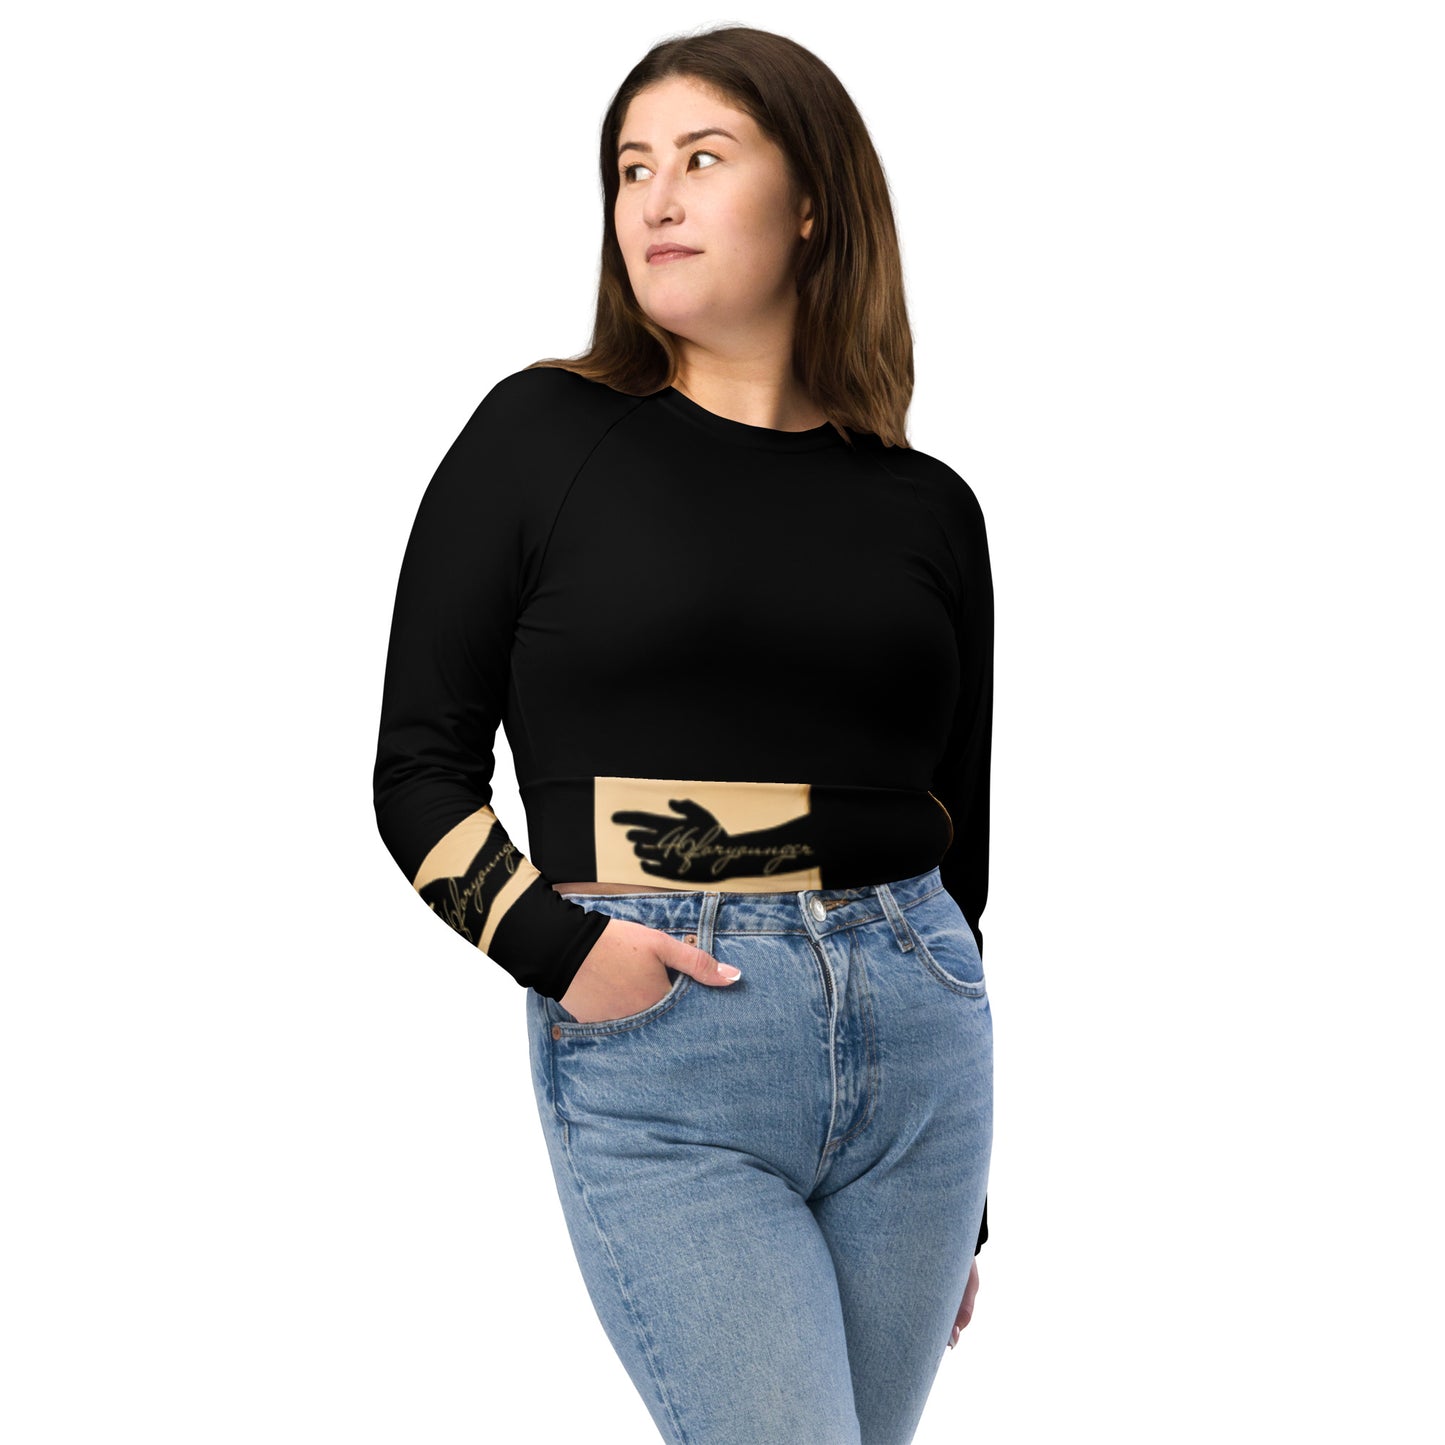 A-Ray of Emotions Long-Sleeve Crop Top - Reach: Inspire and Stretch